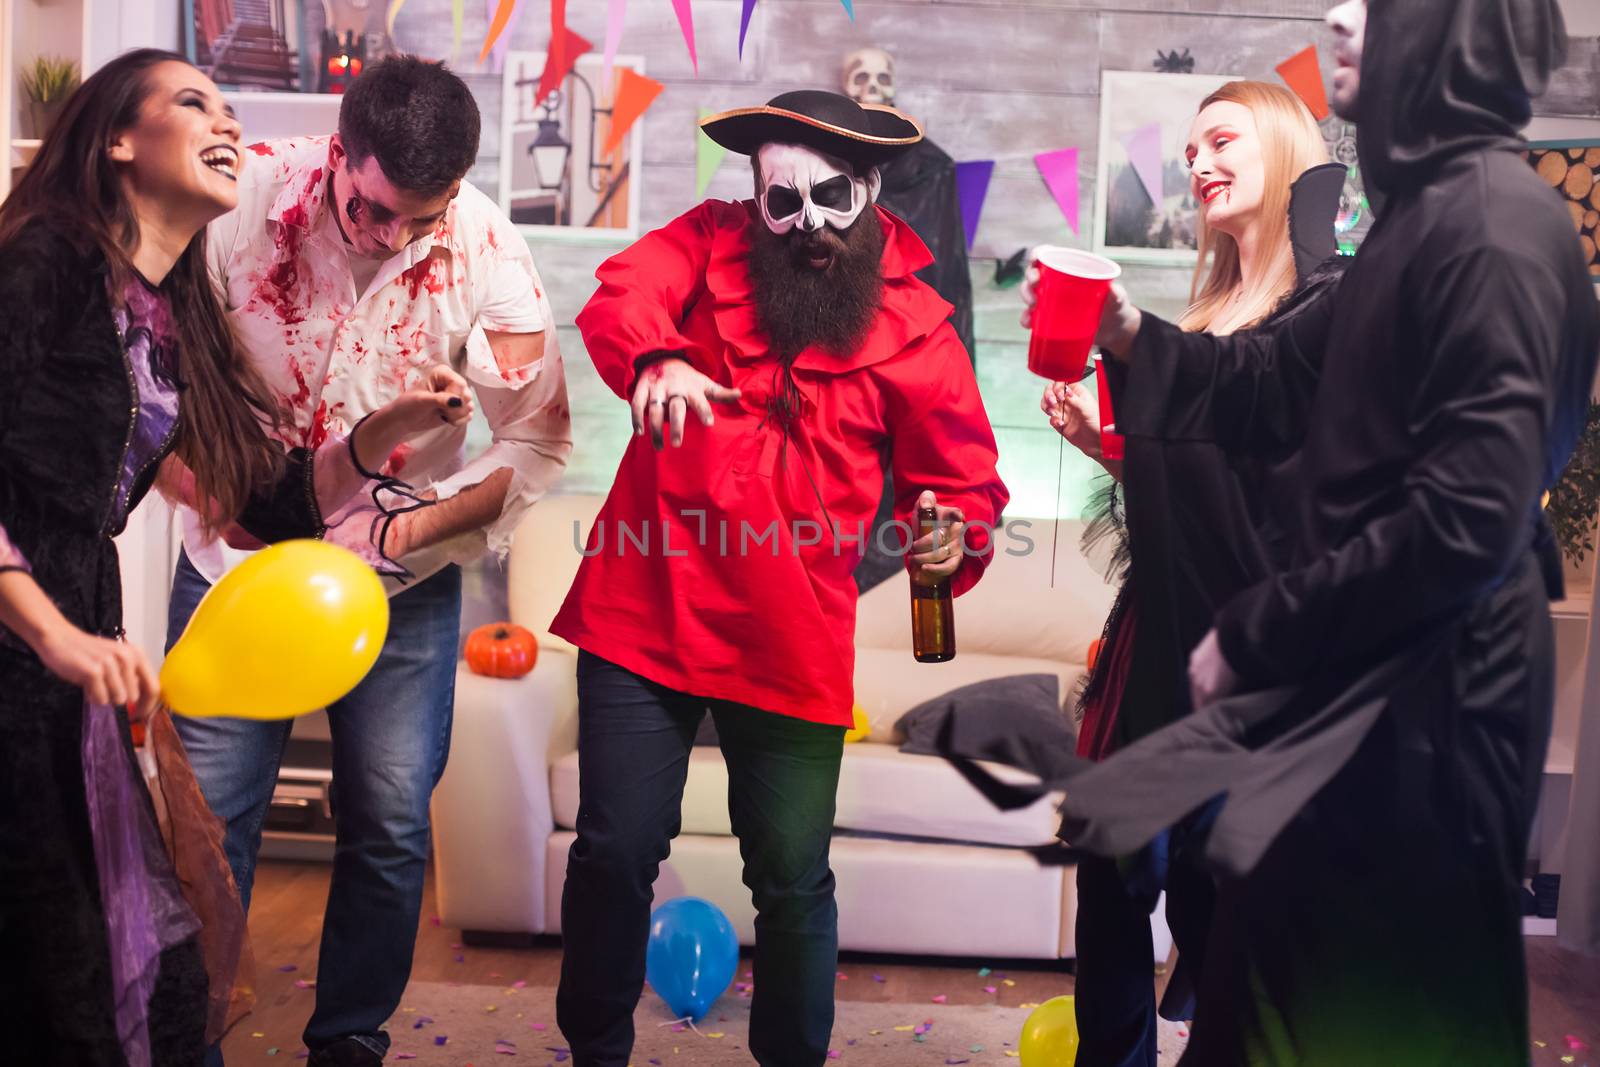 Man dressed up like a pirate dancing around his friends celebrating halloween.